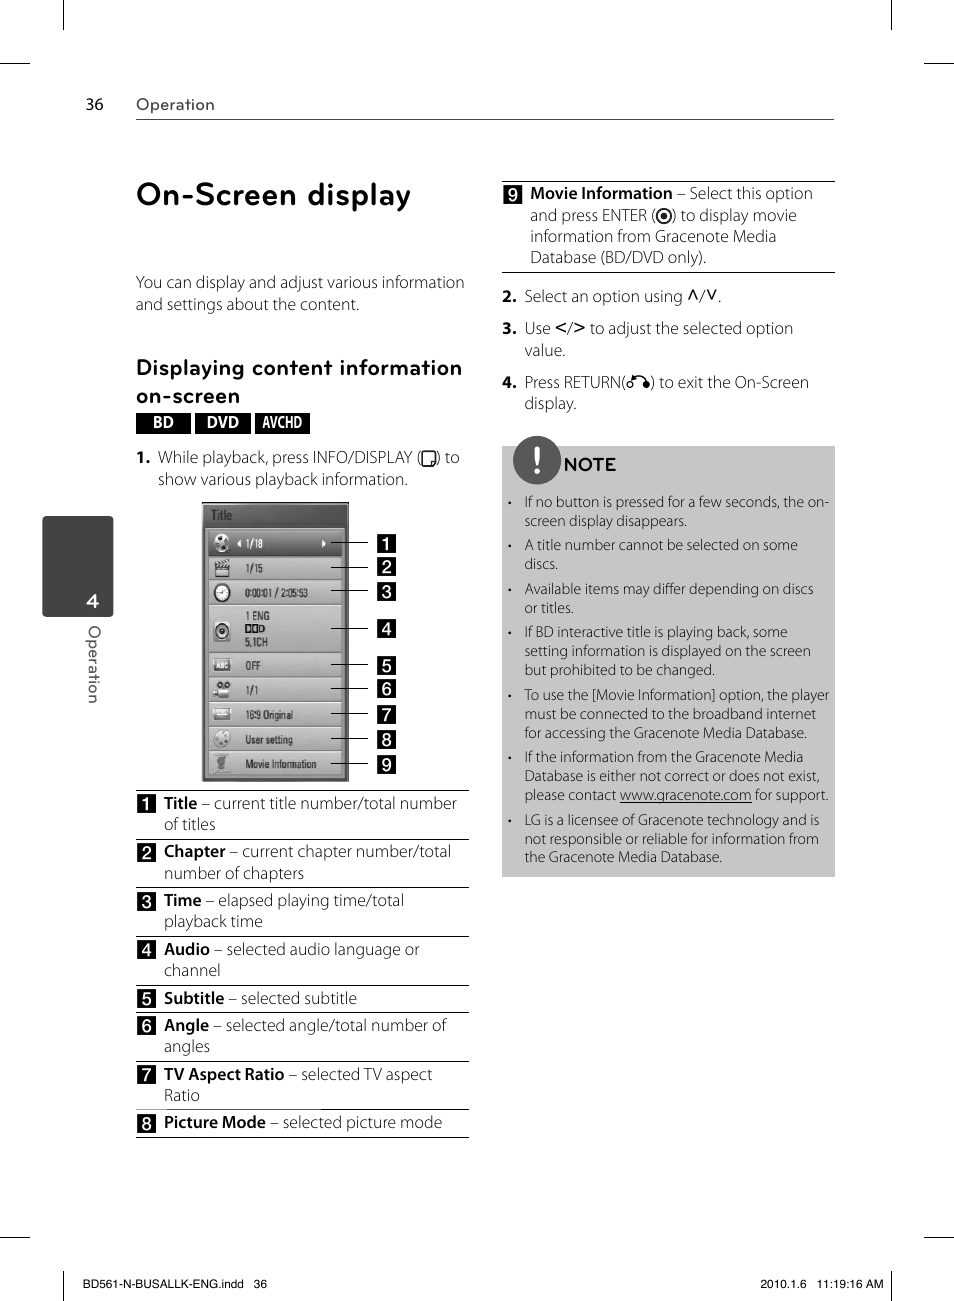 On-screen display, Displaying content information on-screen | LG BD550 User Manual | Page 36 / 84